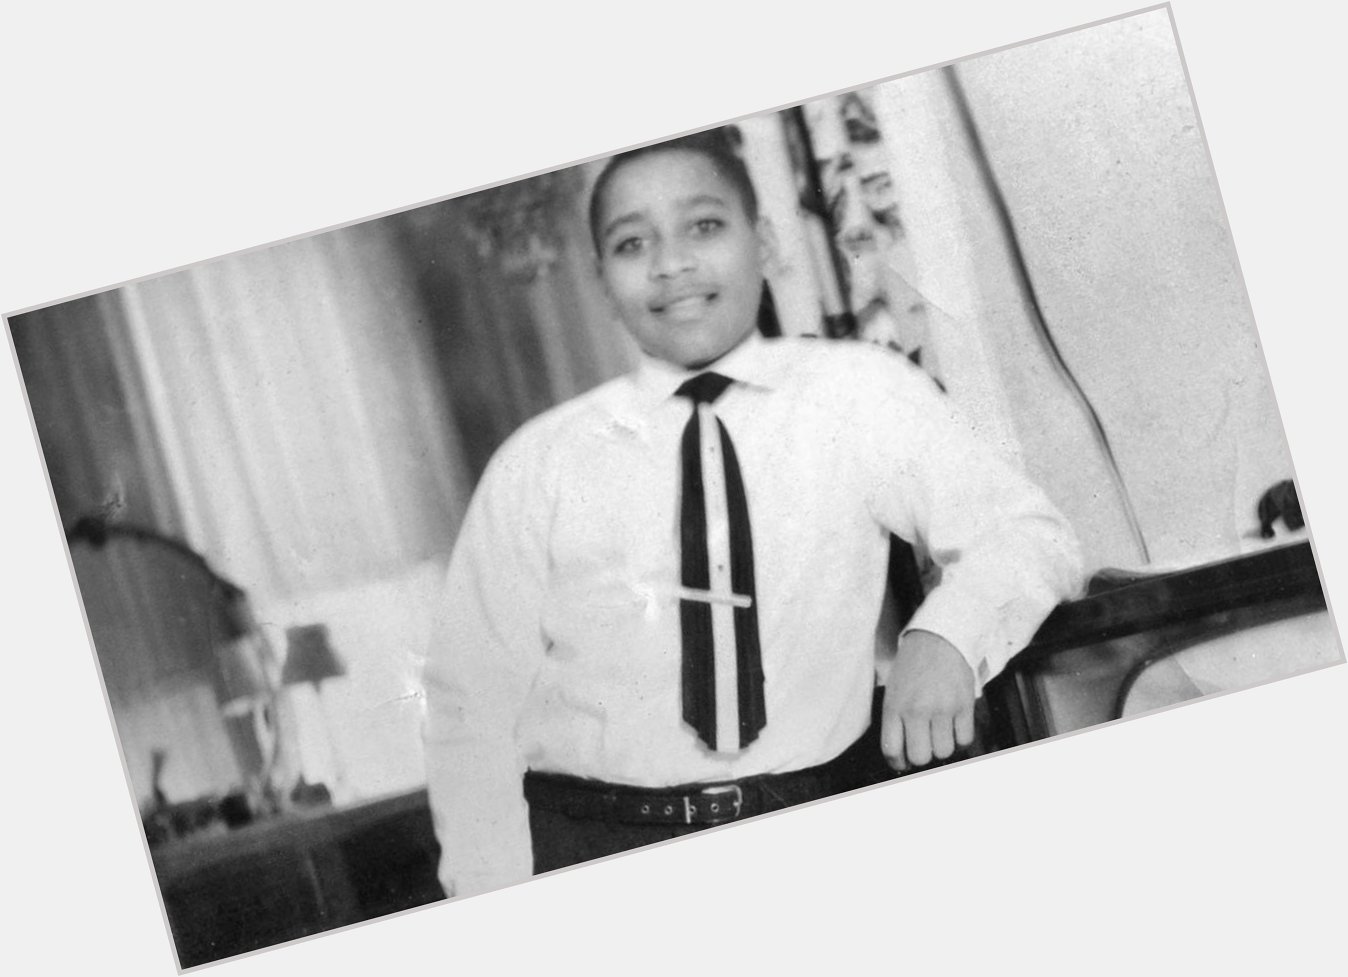 He would ve been 78 years old today. Happy birthday Emmett Till 